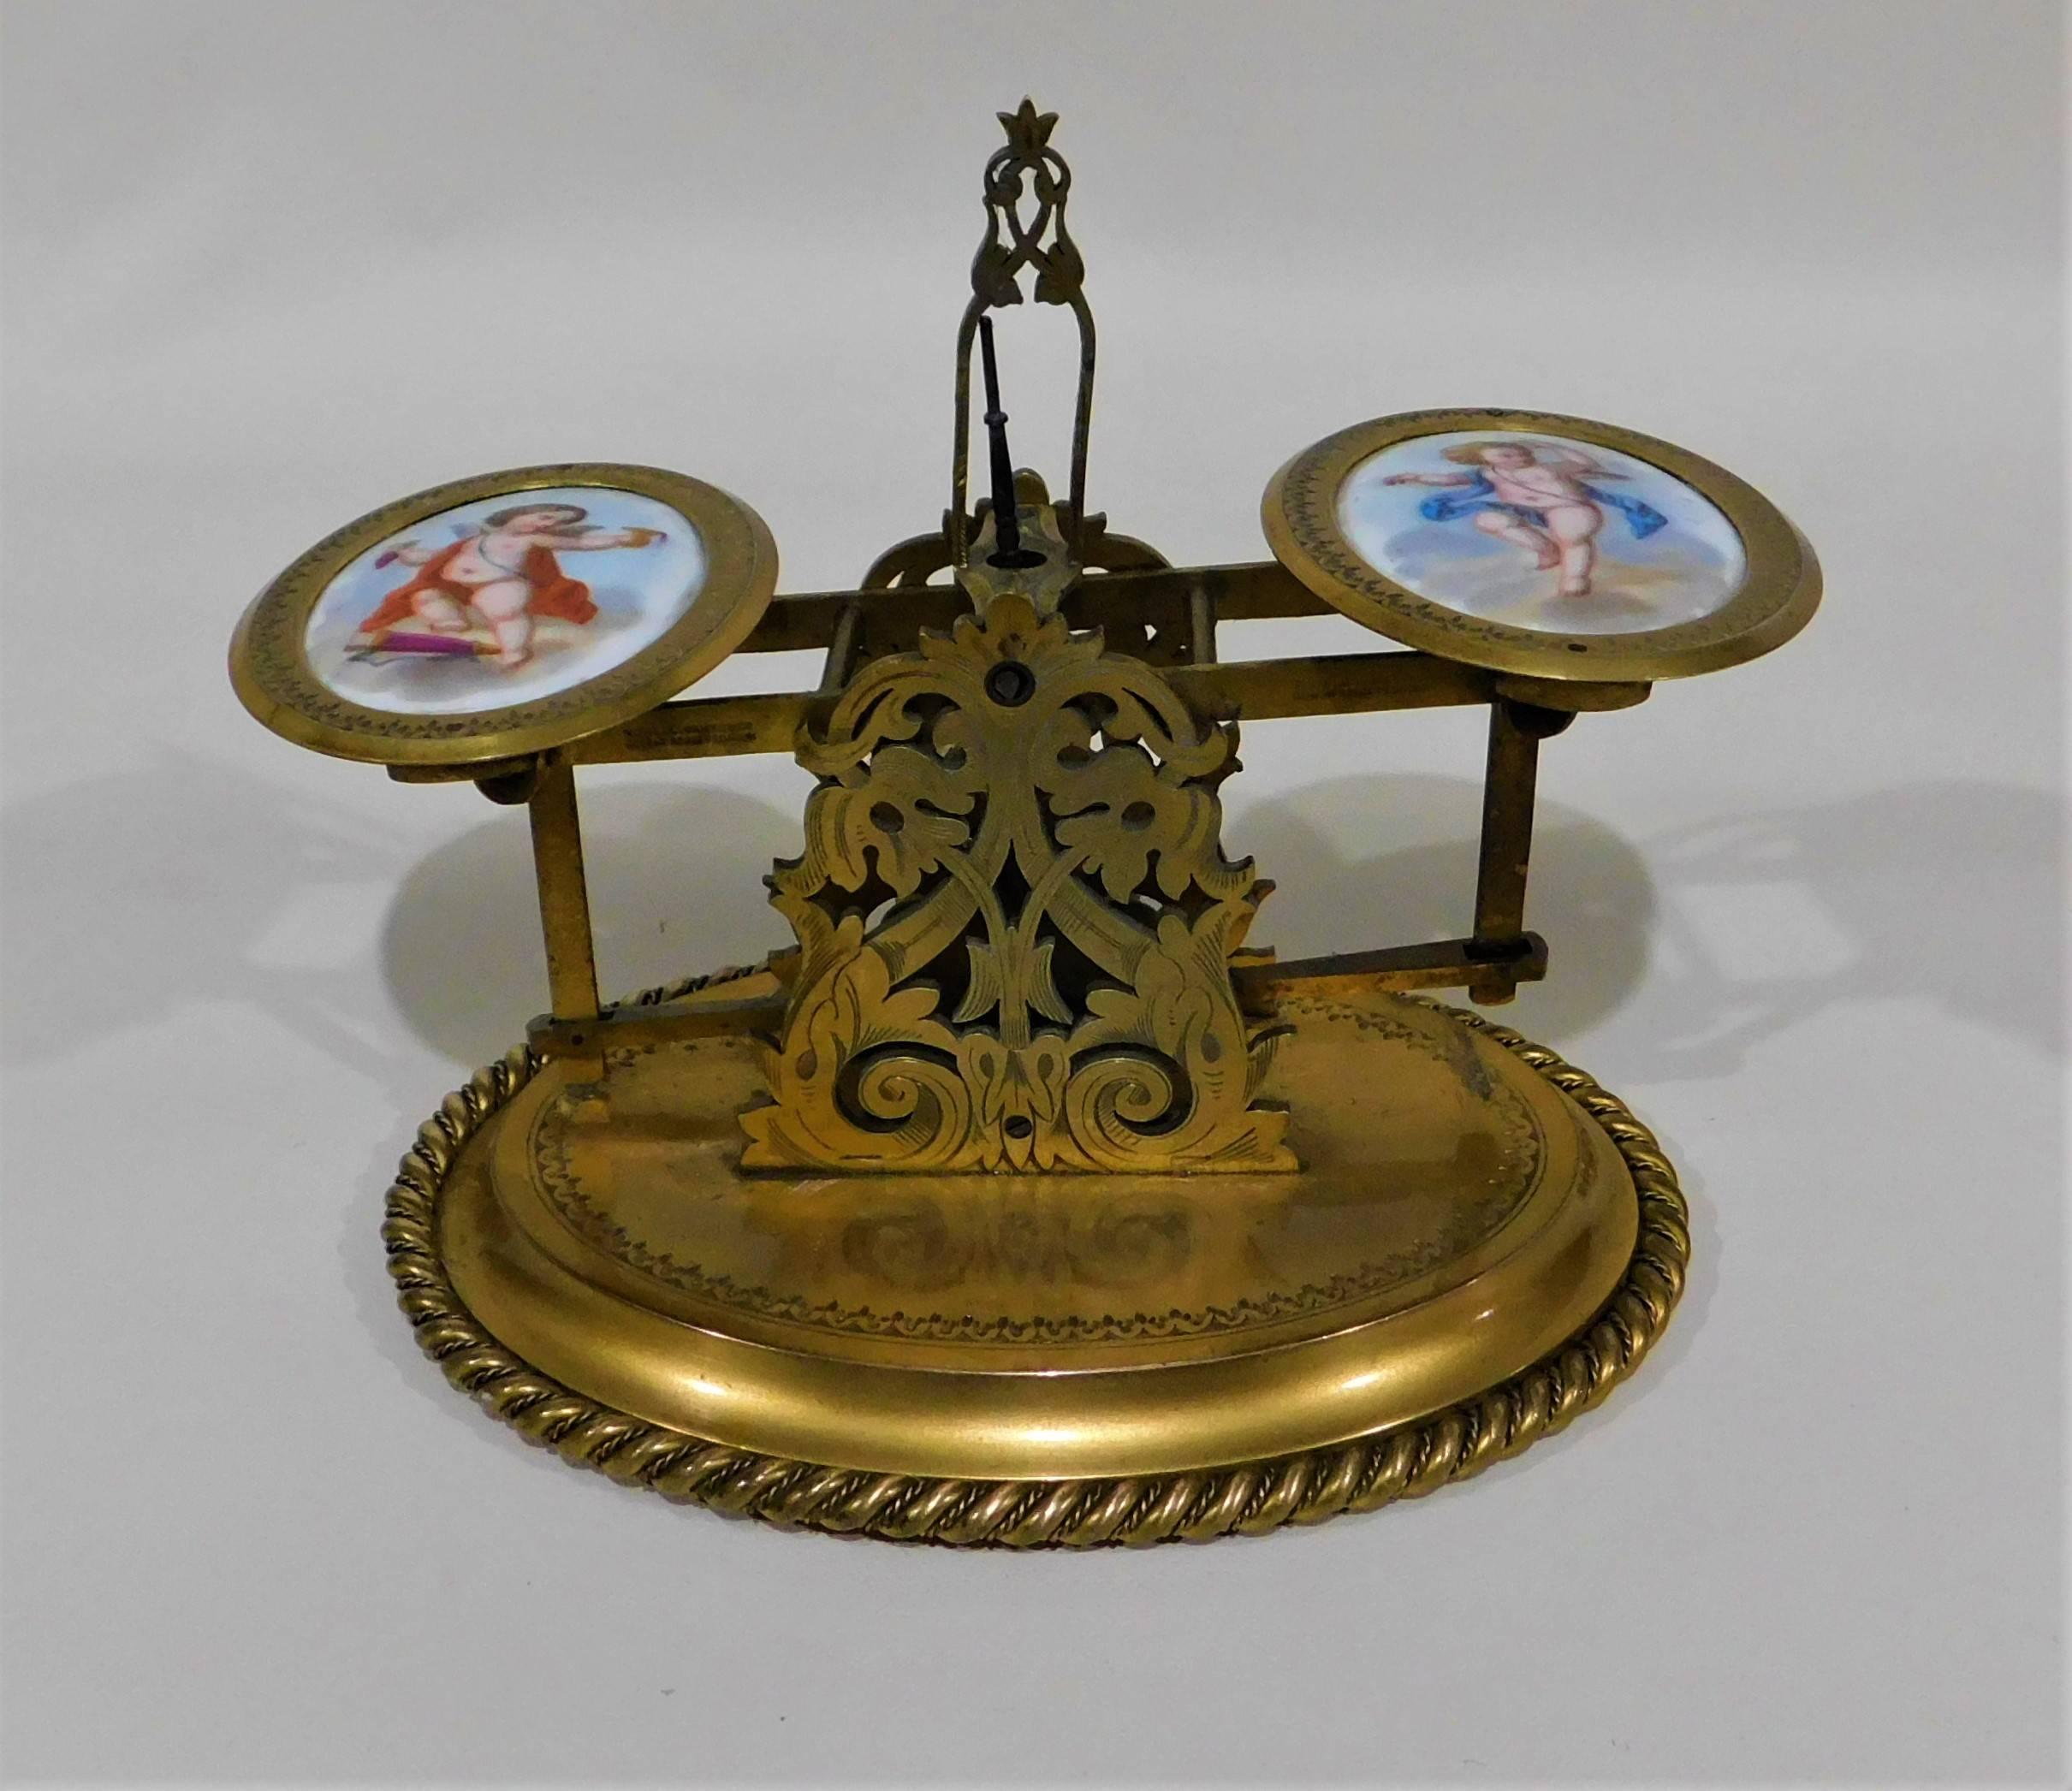 Howell James & Company brass and porcelain postal letter scale, Regent St. London, circa 1880.
With two hand-painted porcelain plaques depicting cherubs and two stacking weights, one ounce and one quarter ounce.

Howell James & Company were a